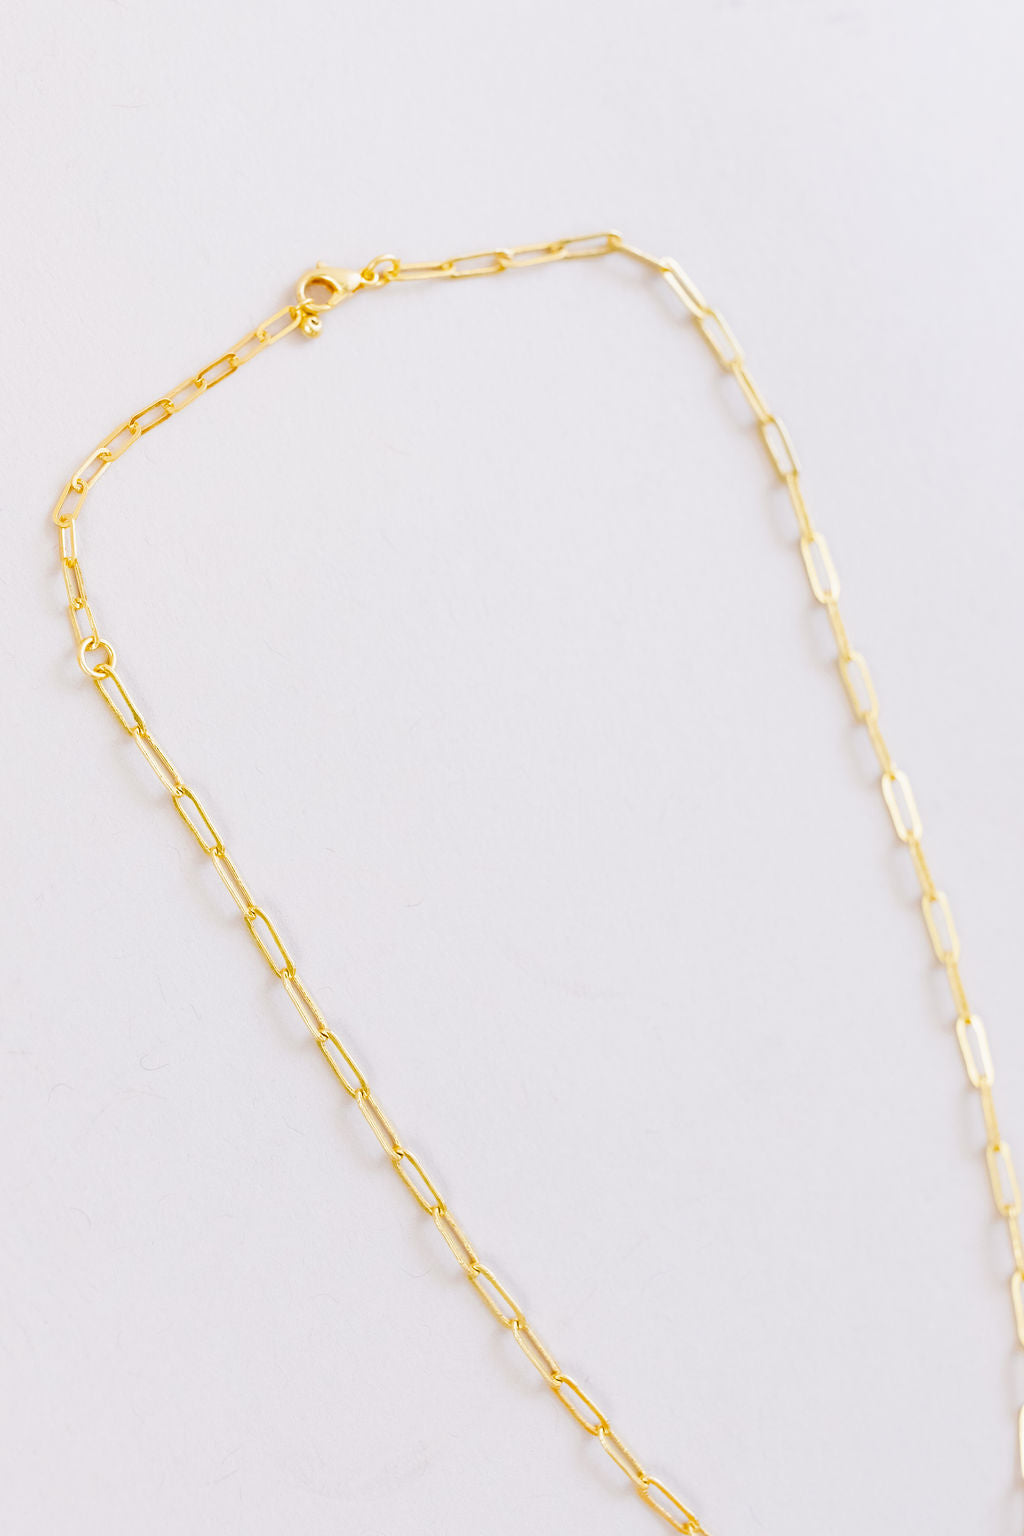 Stacked To Perfection Paperclip Chain Necklace - Poppy and Stella